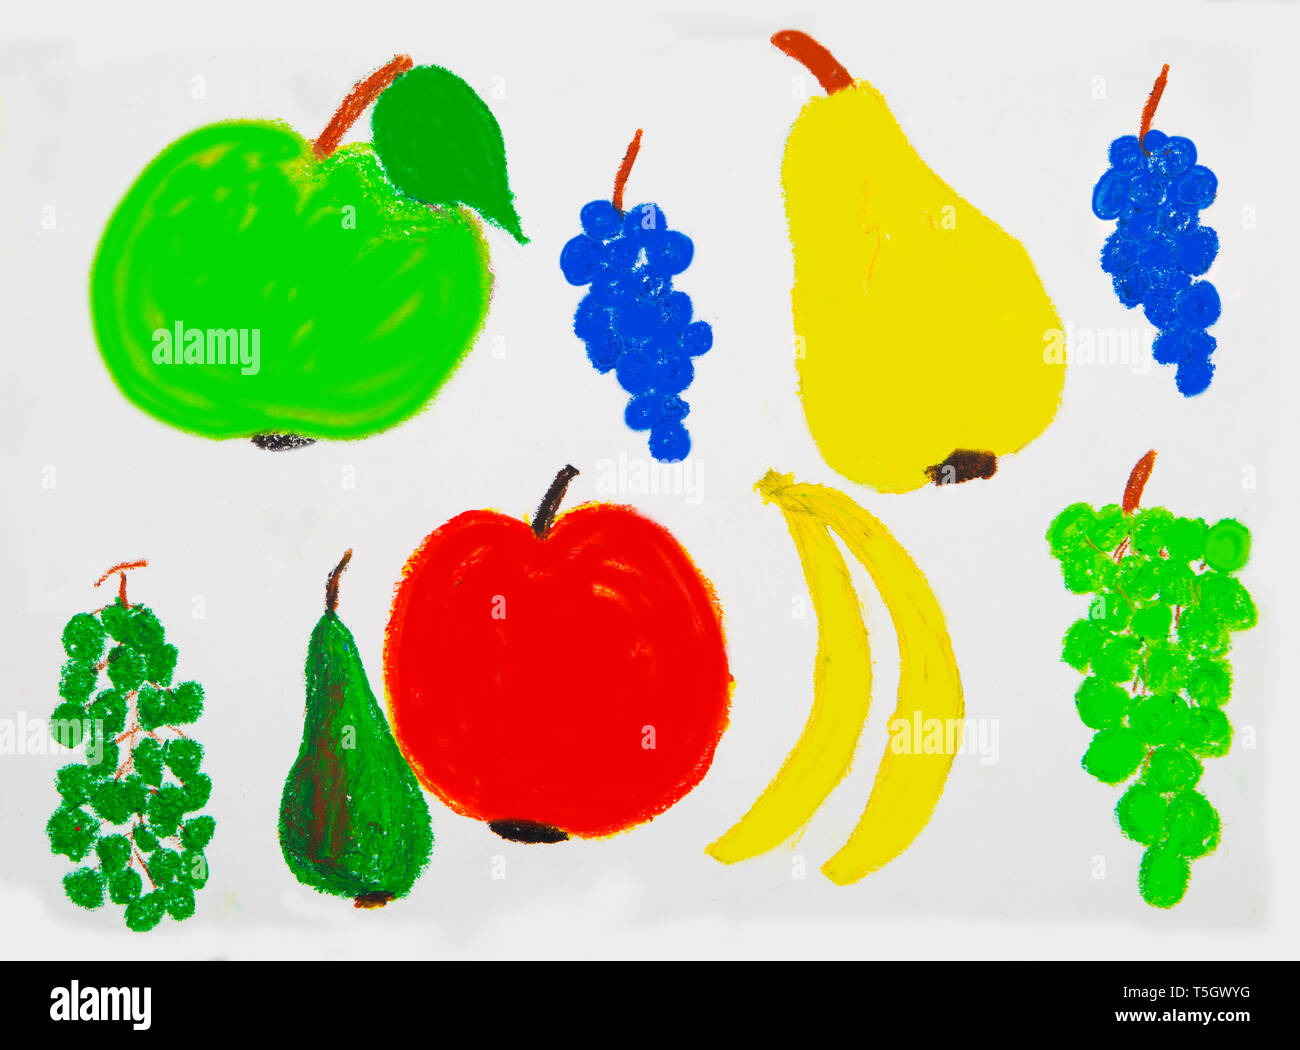 Children's painting of various fruits Stock Photo